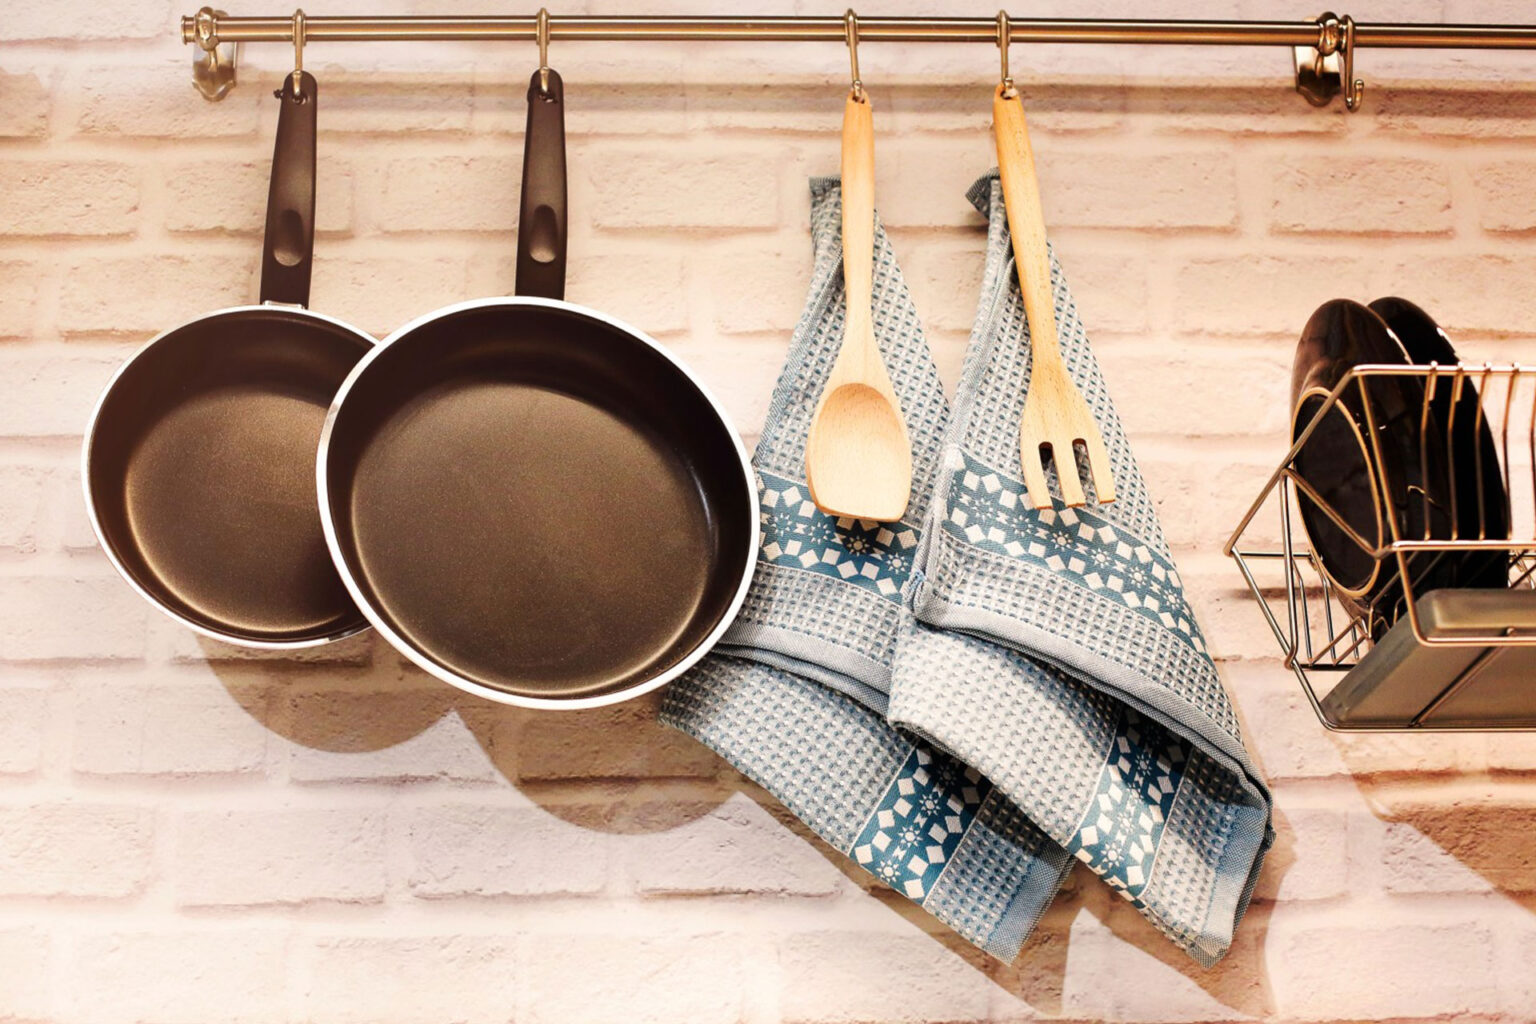 hang pans on kitchen wall